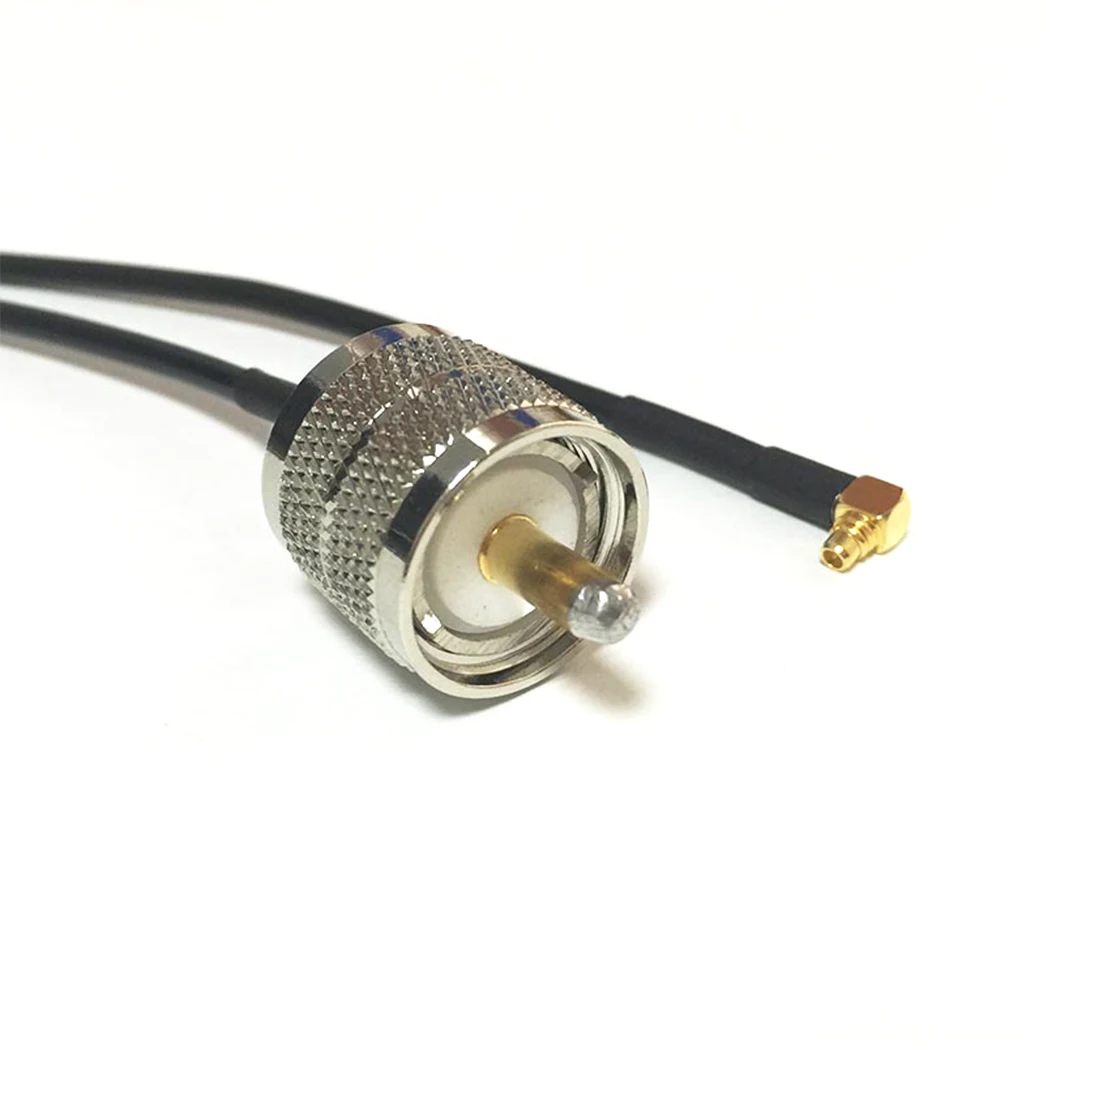 

New Modem Coaxial Cable UHF Male PL259 Switch MMCX Plug Connector RG174 Pigtail Adapter 20CM 8inch